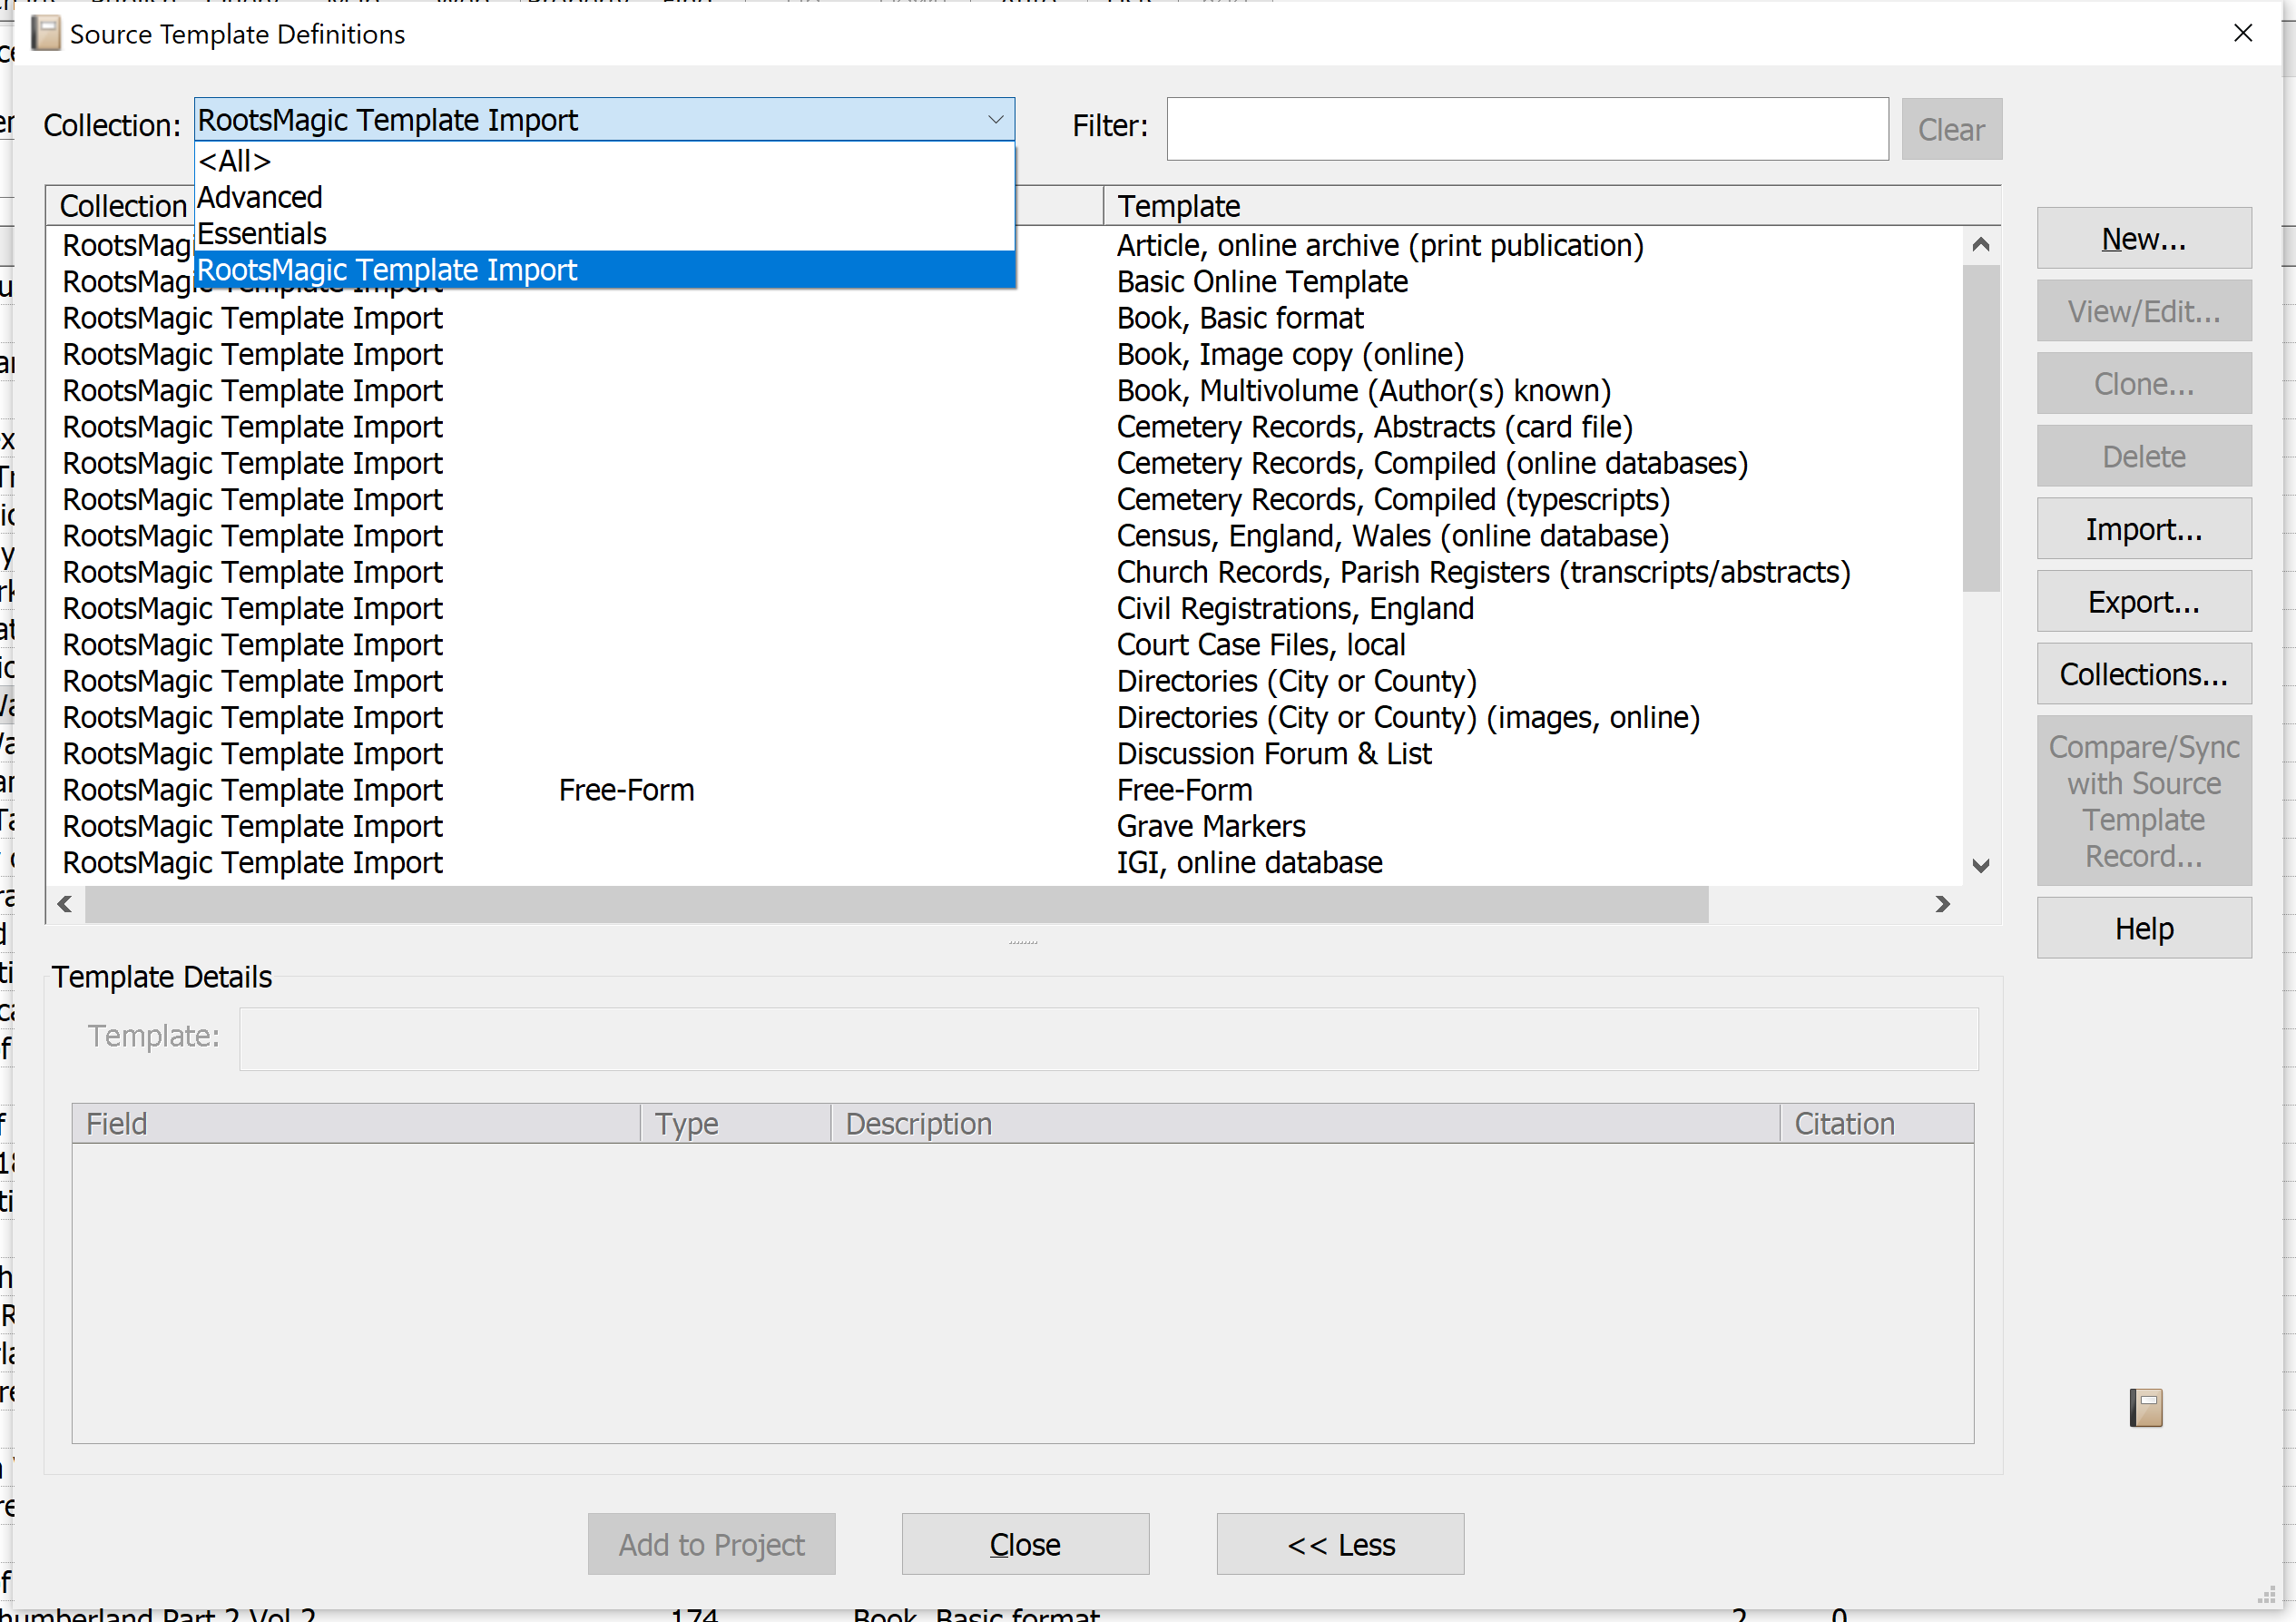 Here's the screenshot of Source Template Definitions from the Tools menu, as you can see there are only 3 collections.